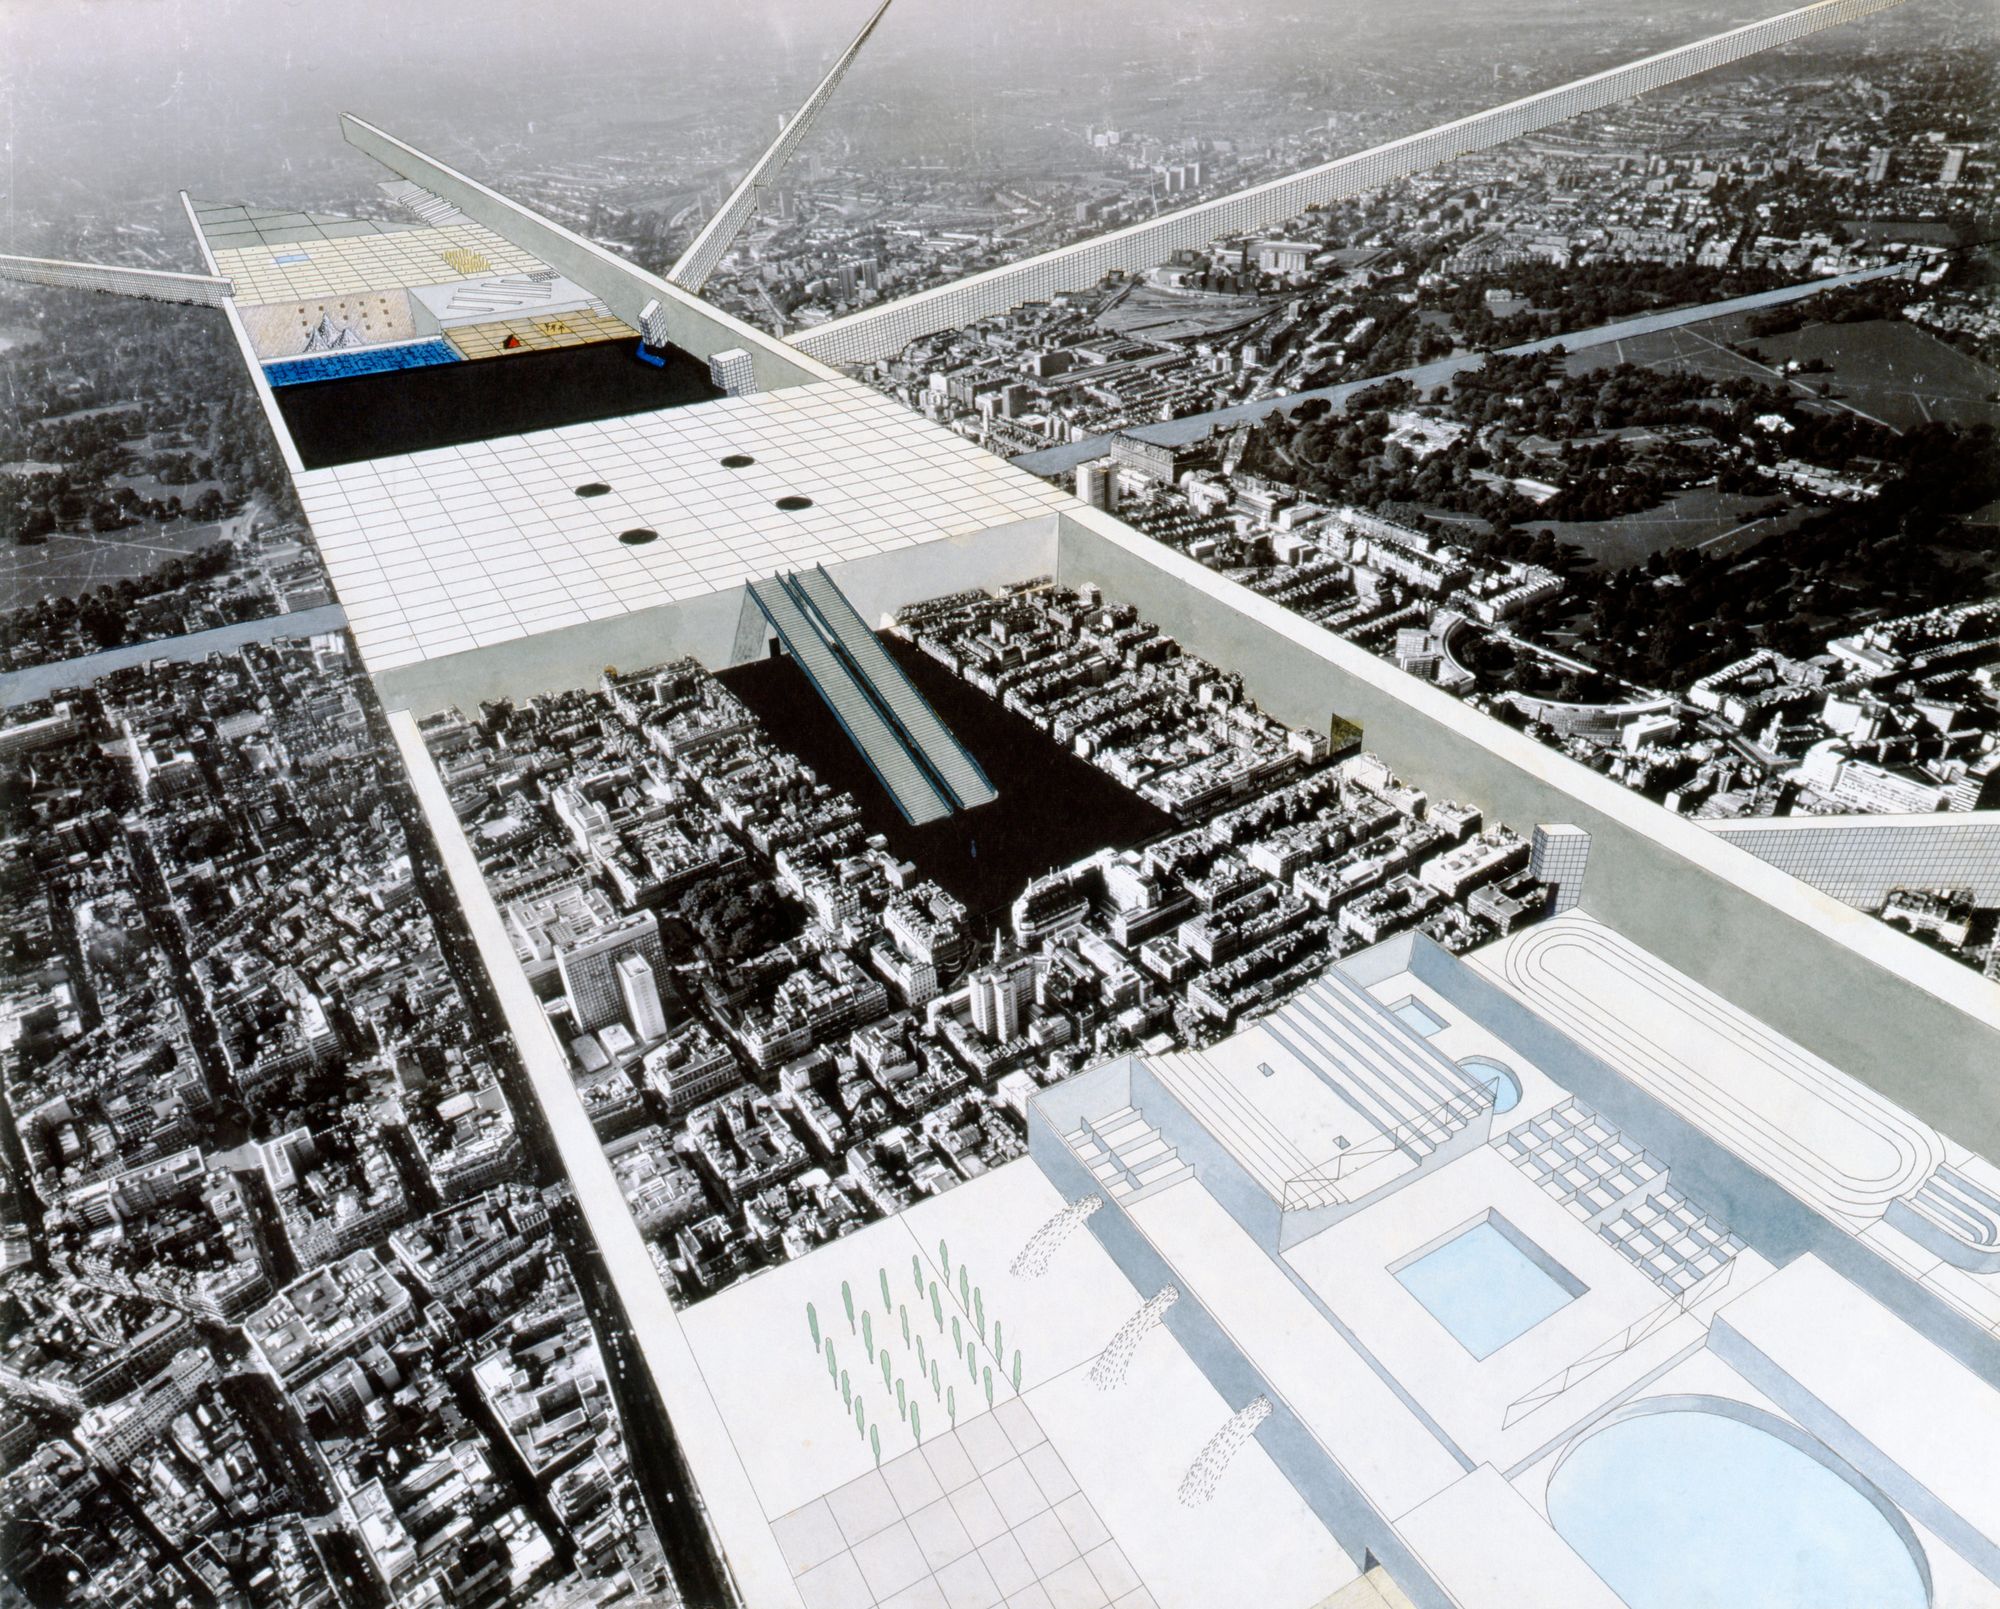 rem koolhaas thesis project